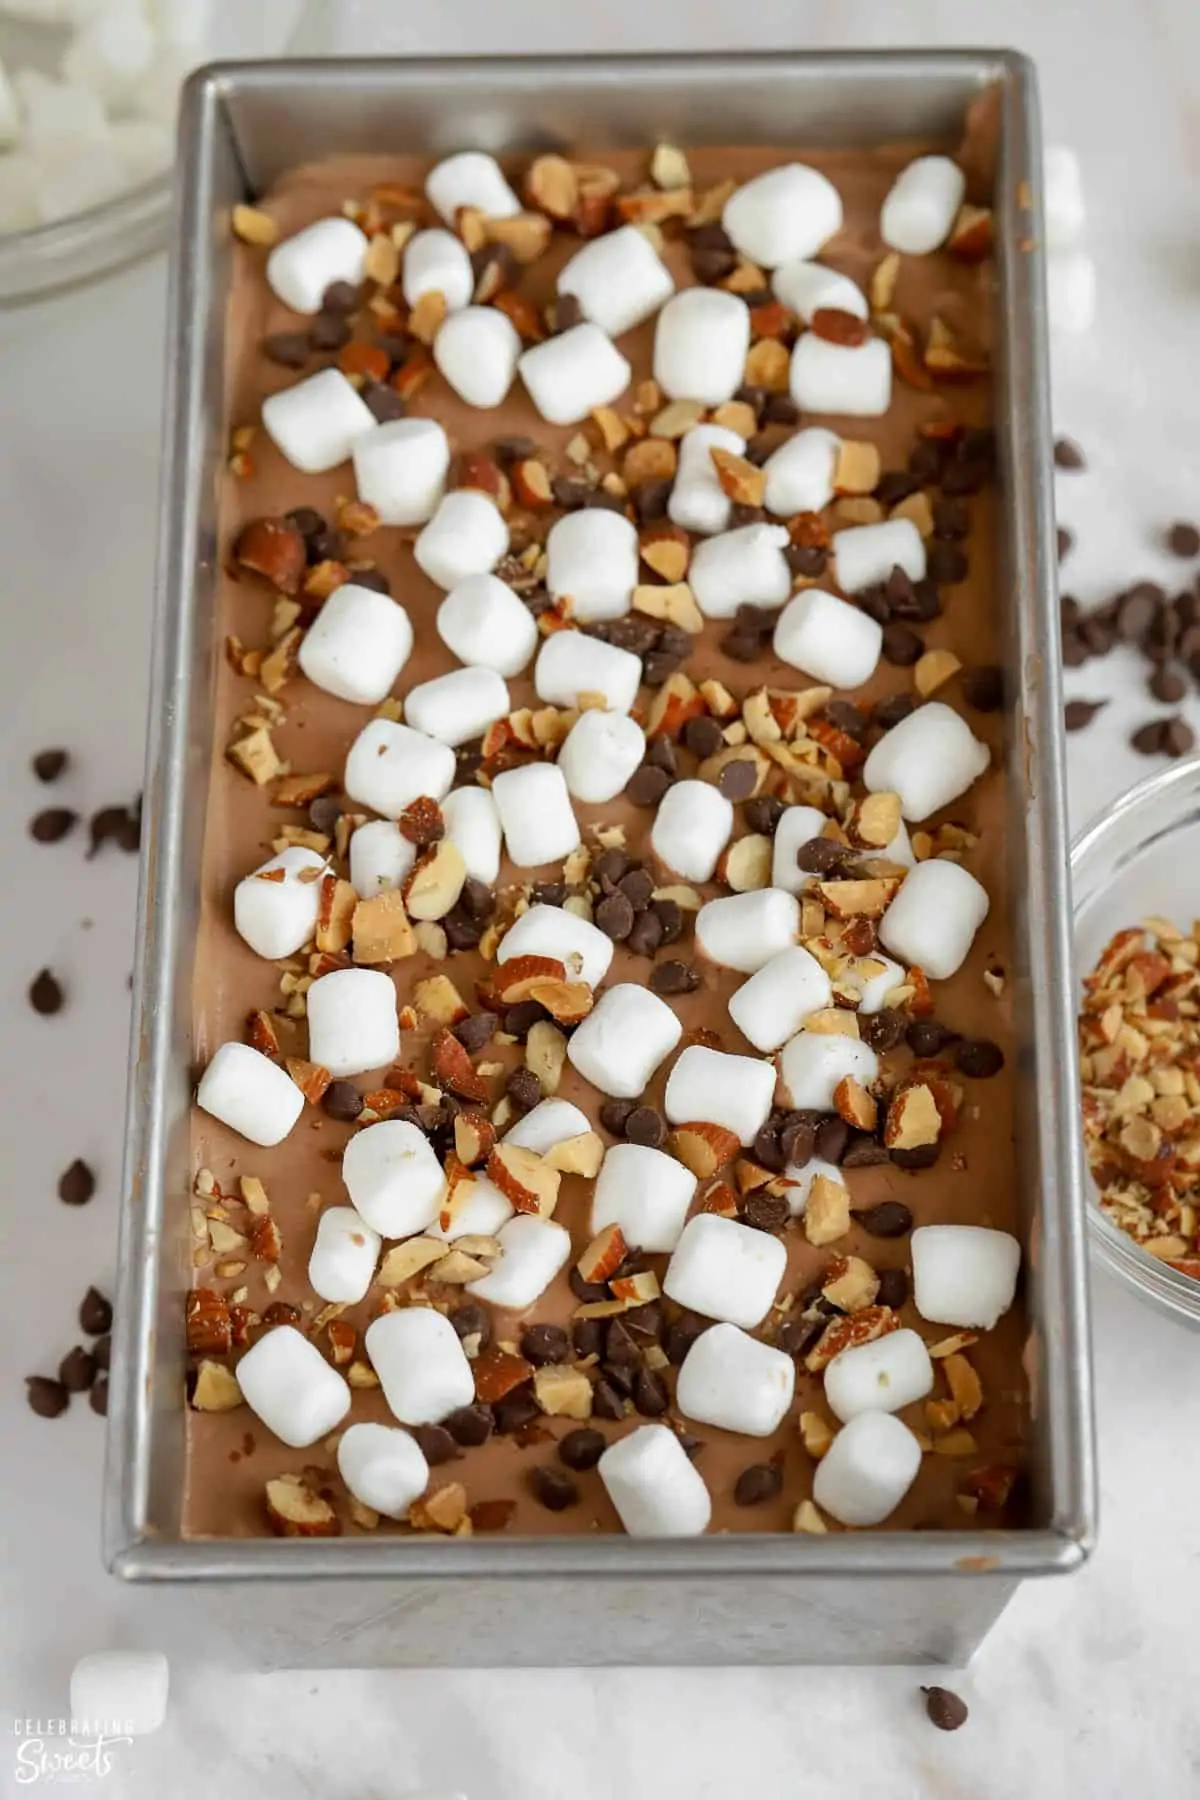 Rocky road ice cream in a loaf pan.